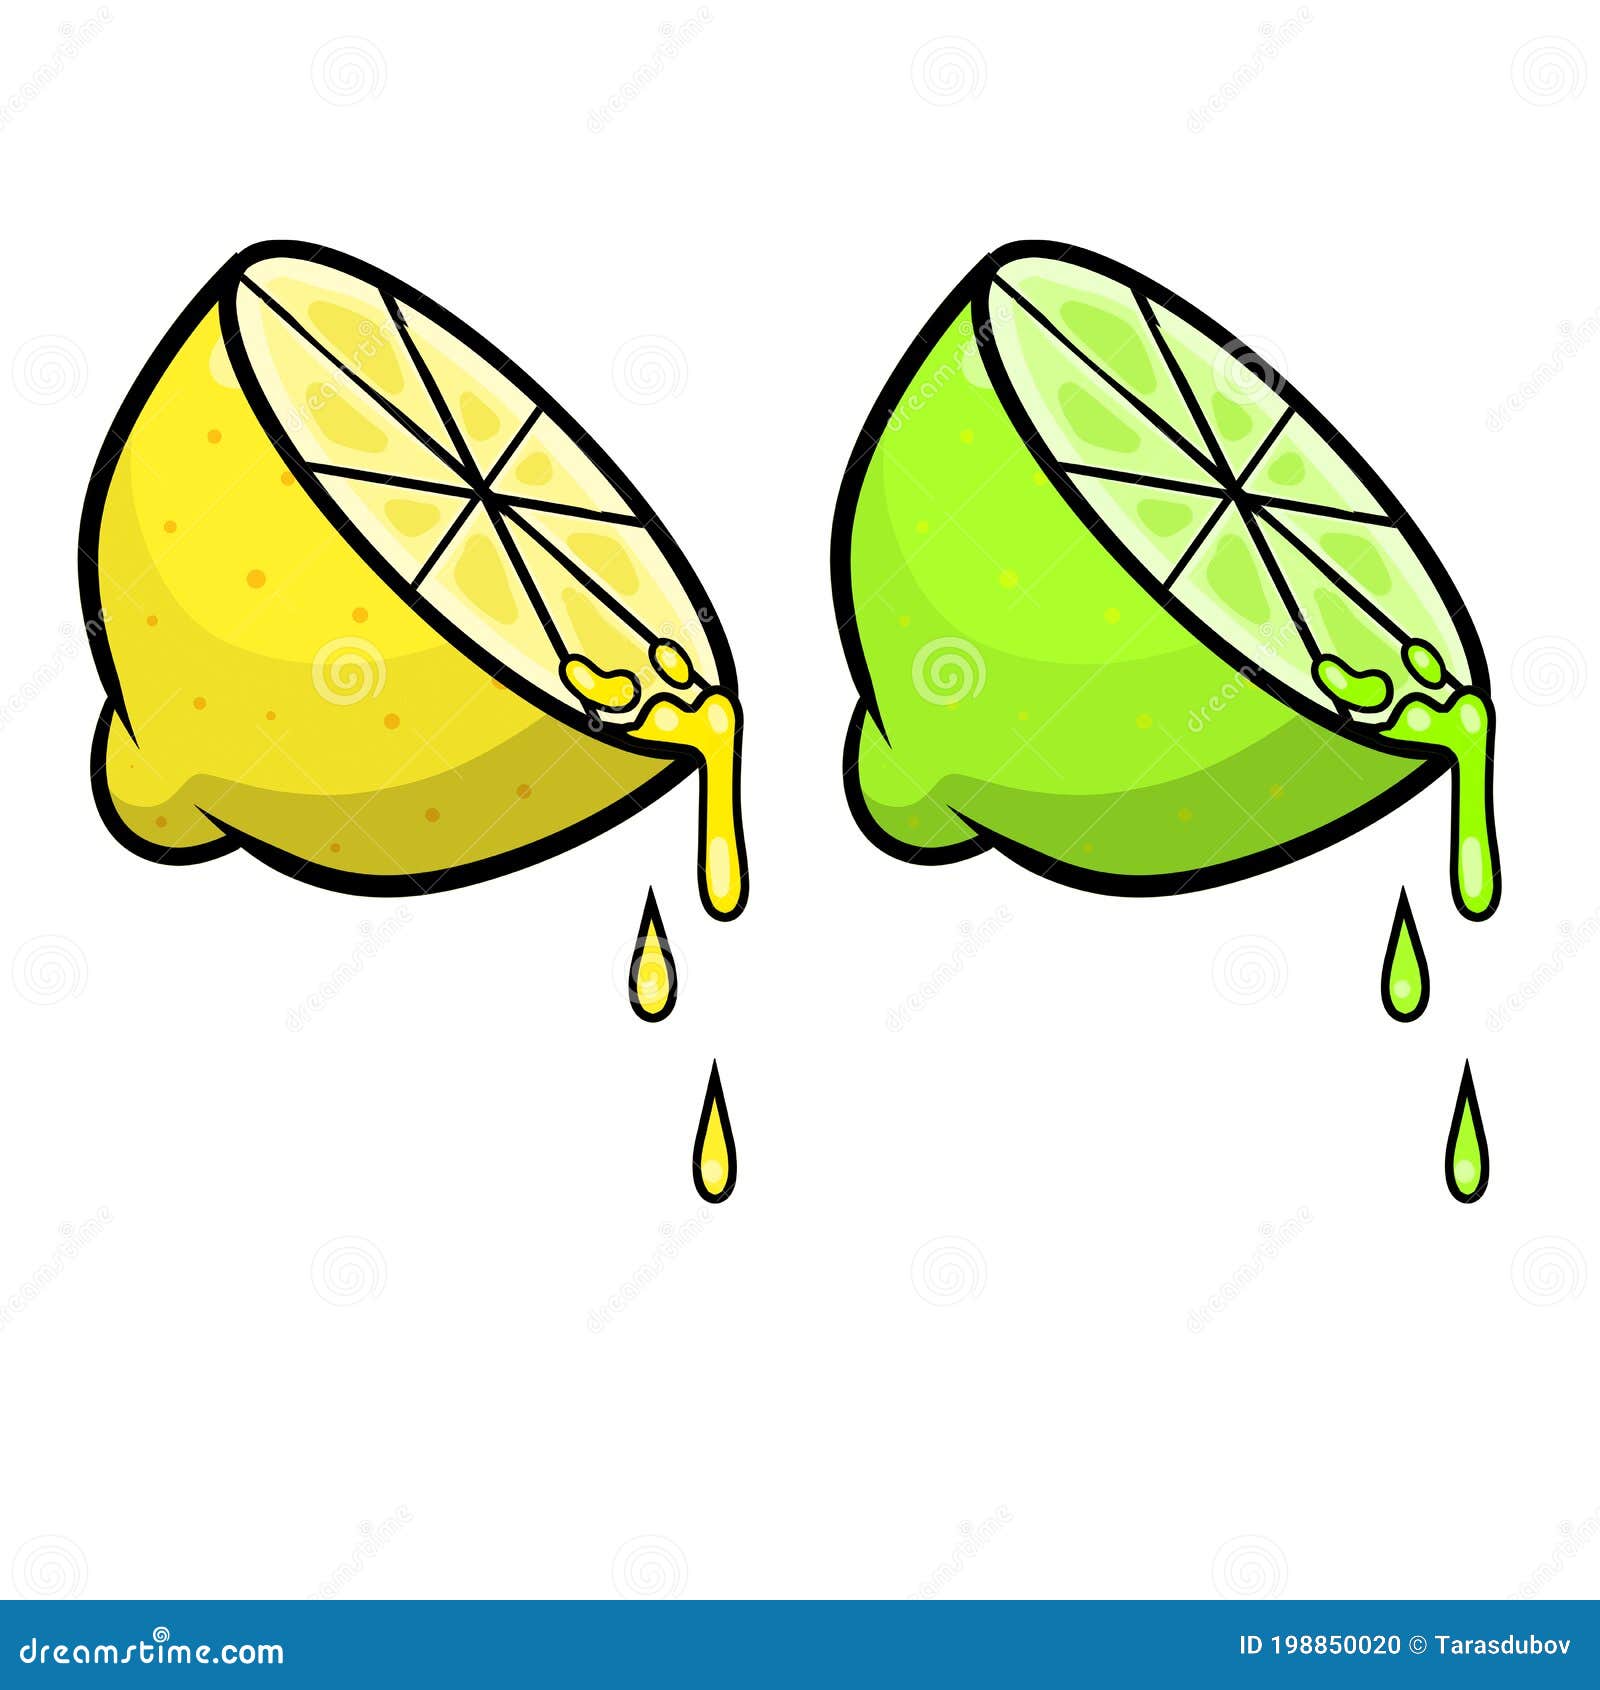 yellow green objects